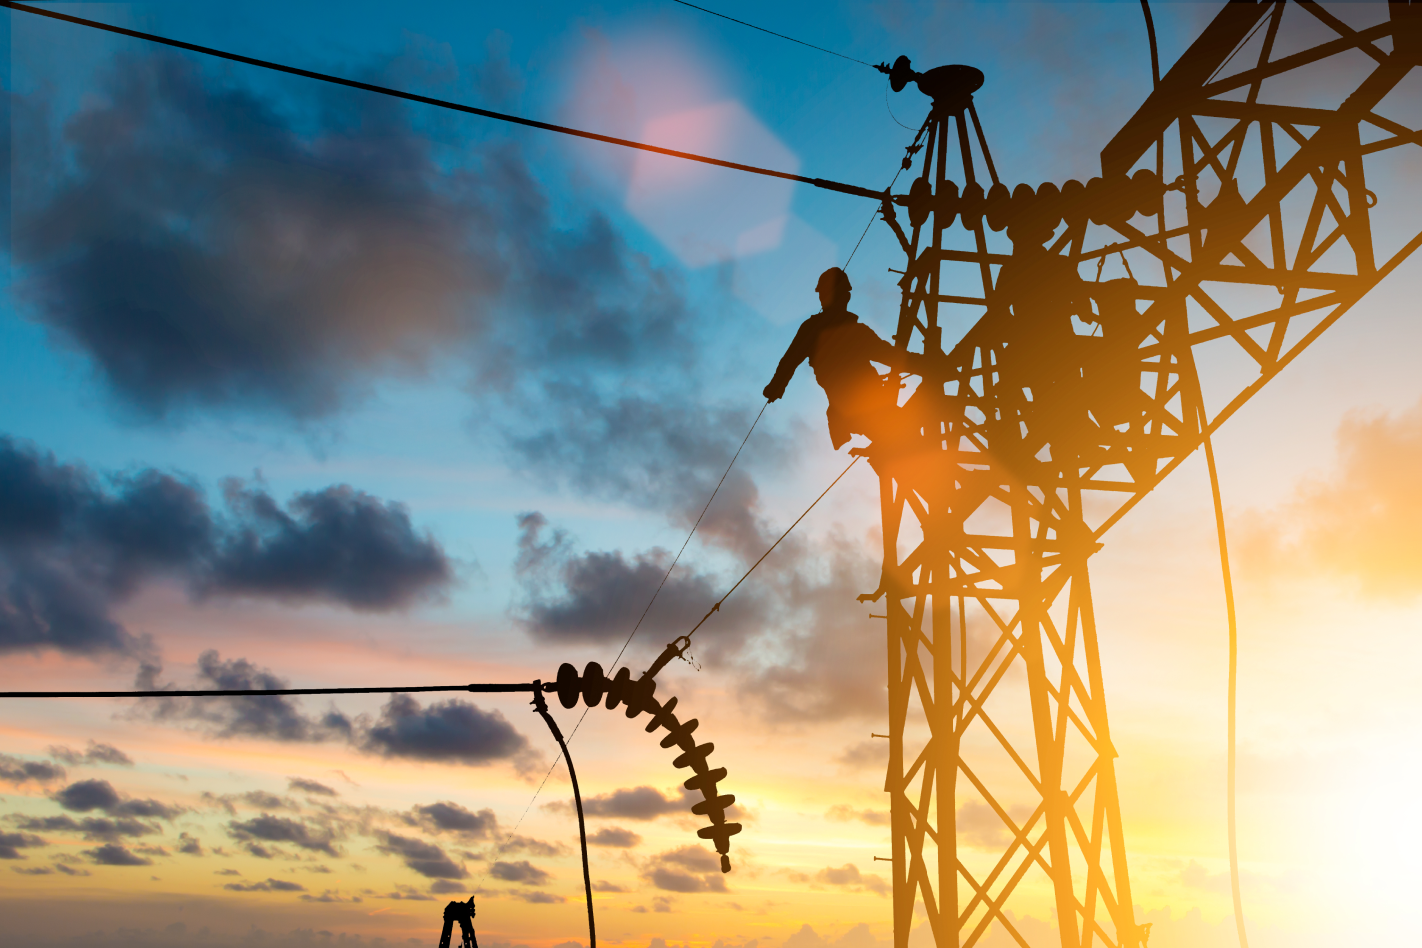 UK Telecoms and Energy crisis: will we go unavailable?